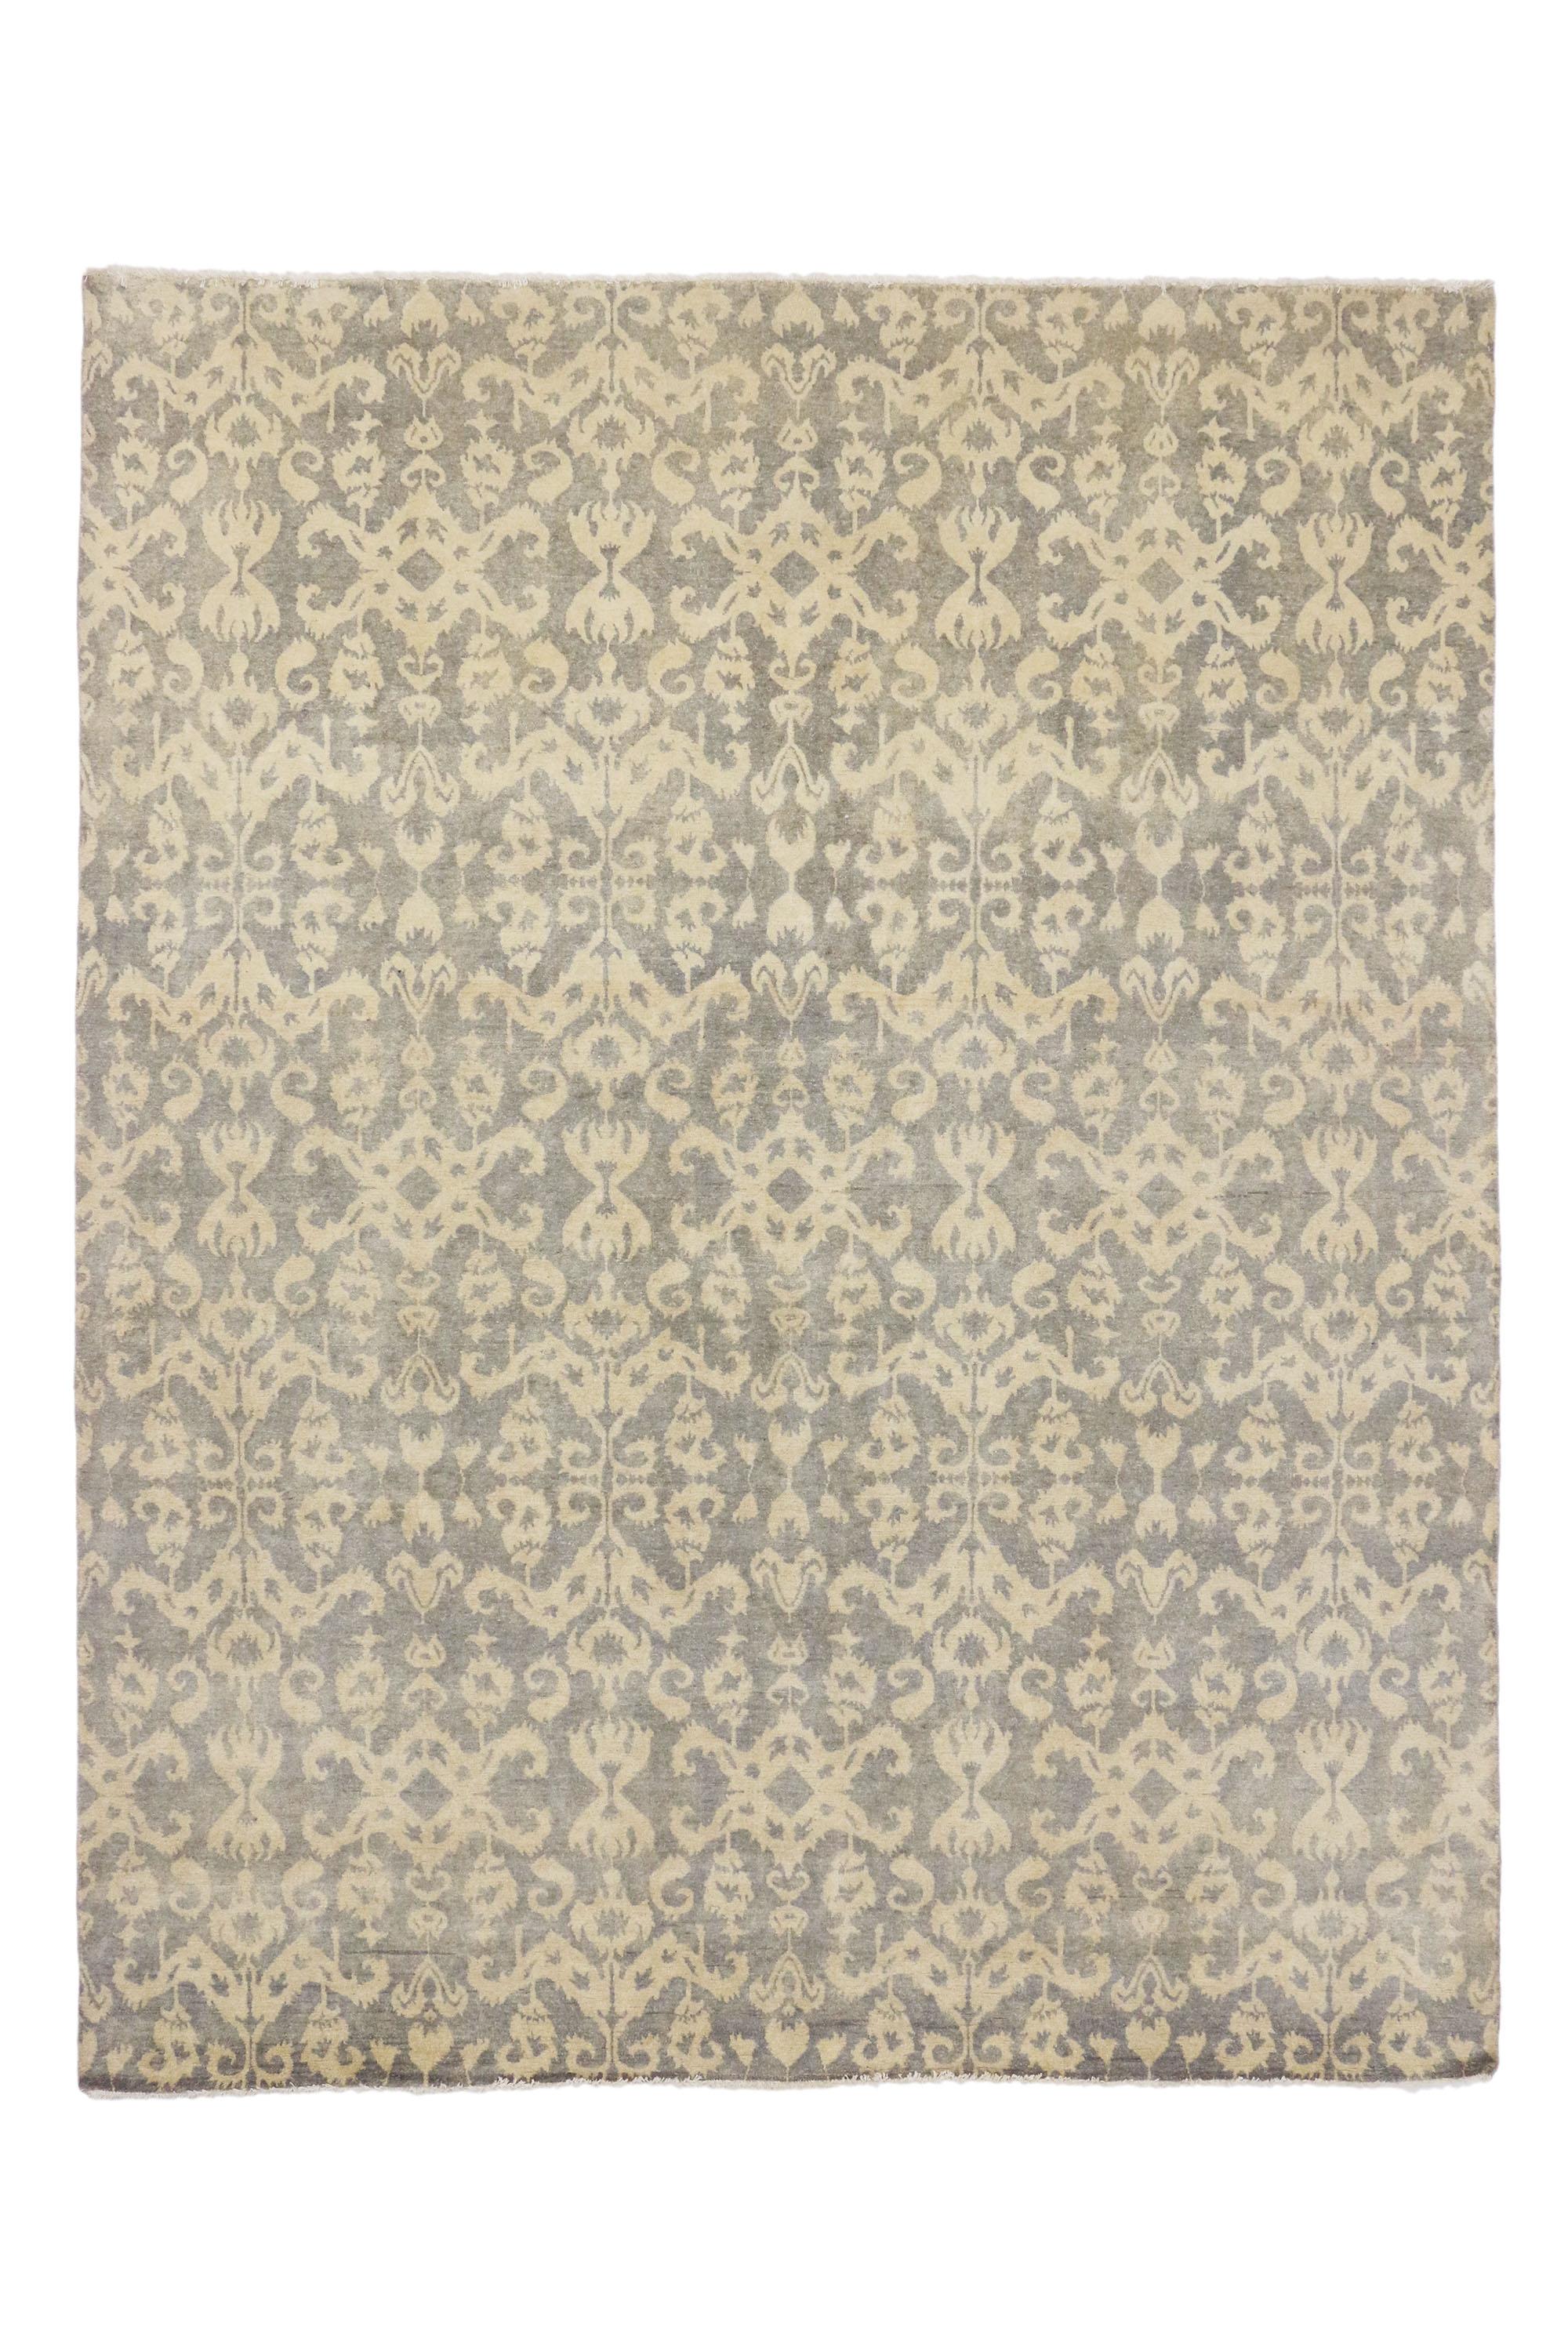 New Ikat Area Rug with Transitional Style